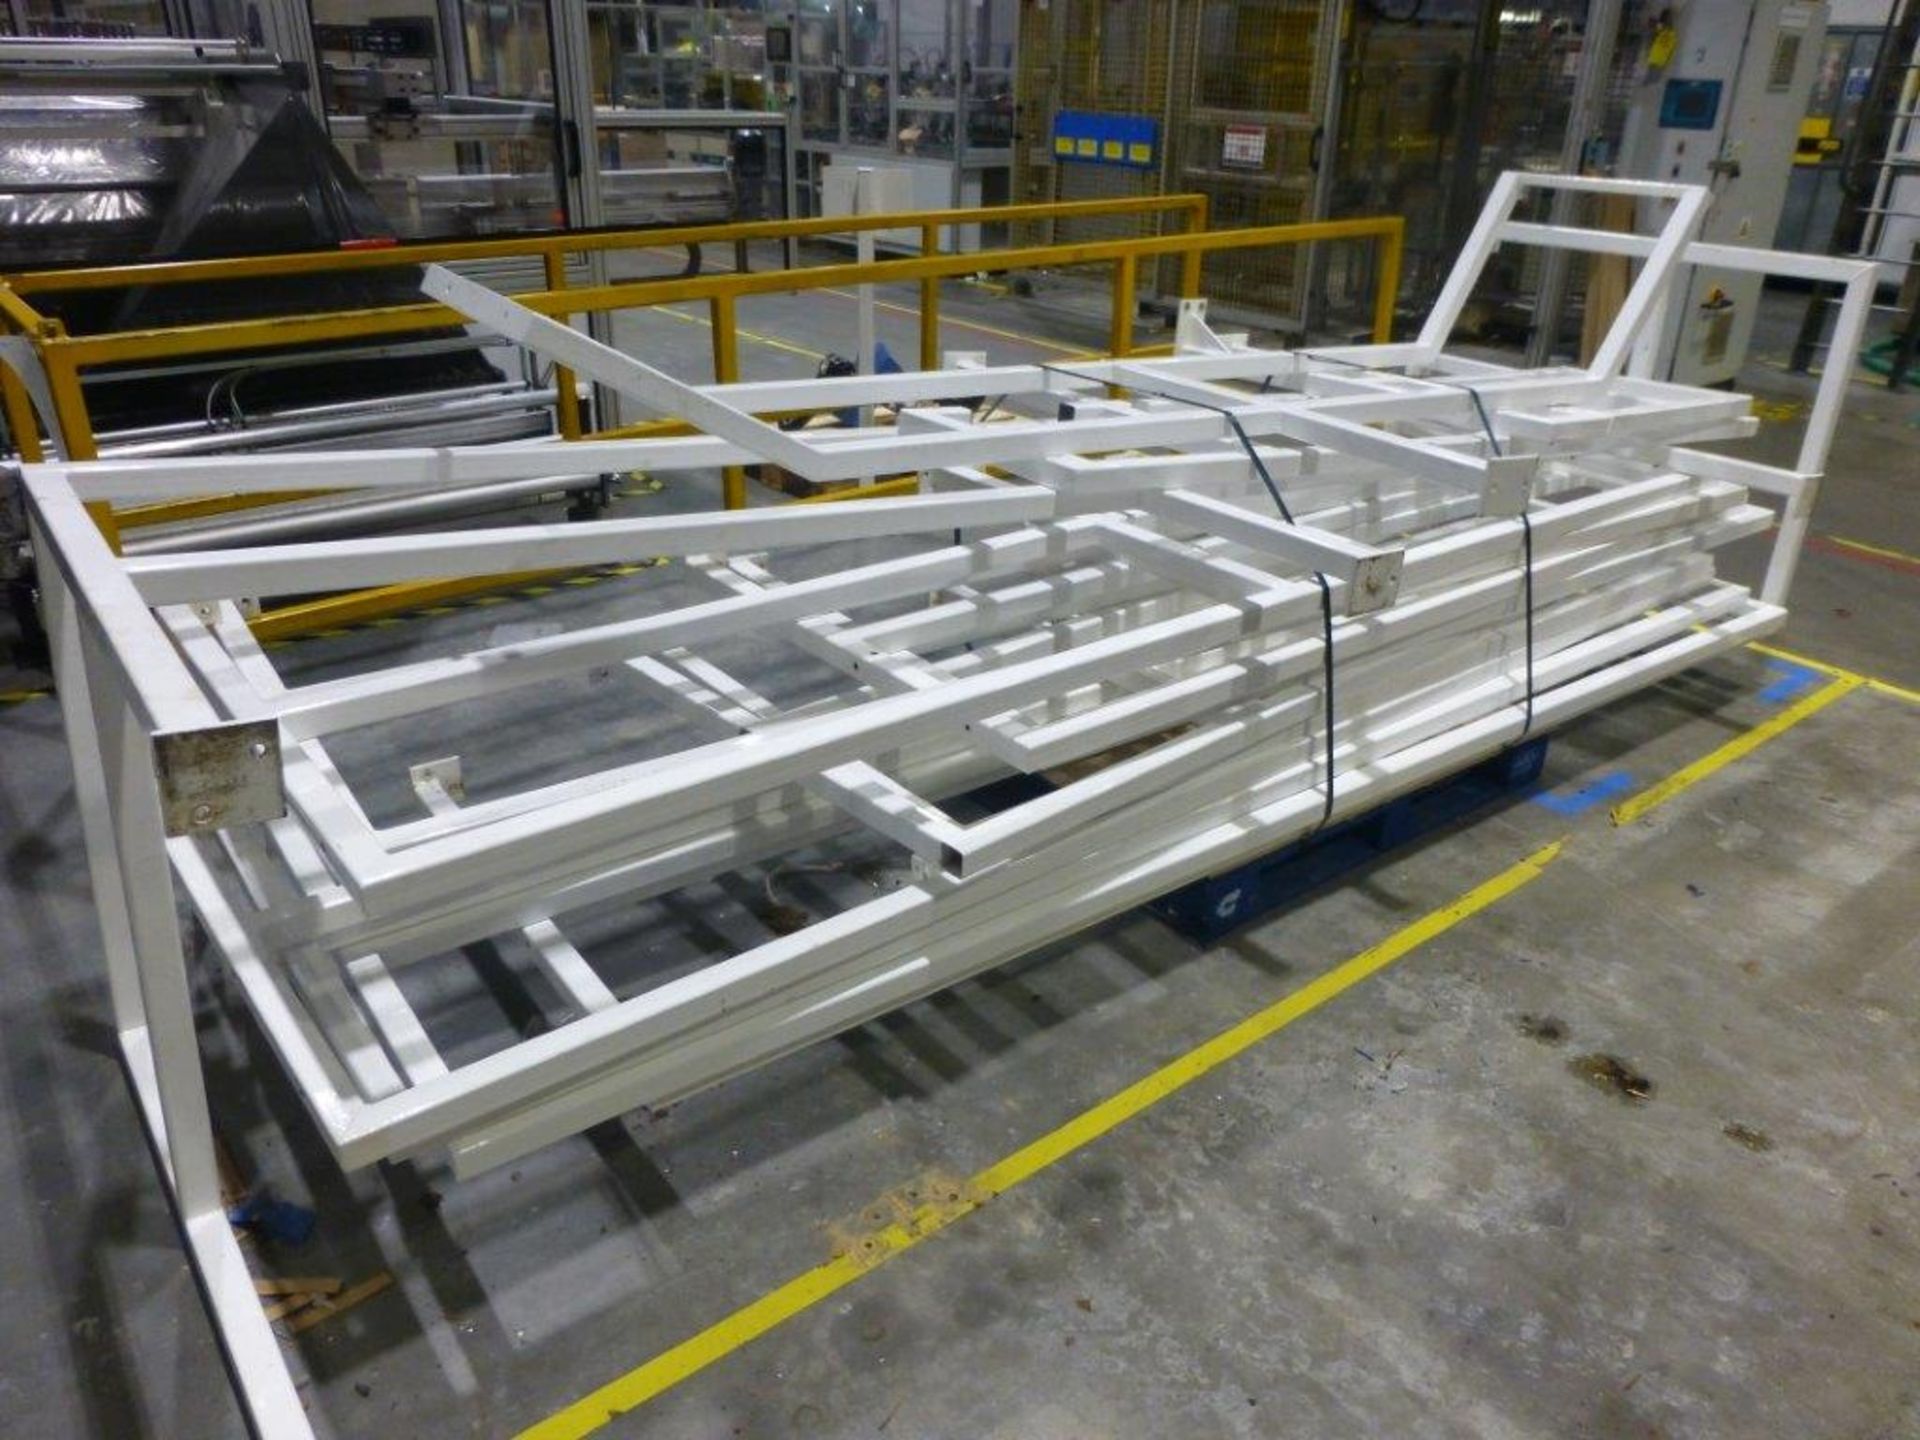 Approximately 40 linear metre 11 section steel fabricated 1100mm high machine/handrail guarding